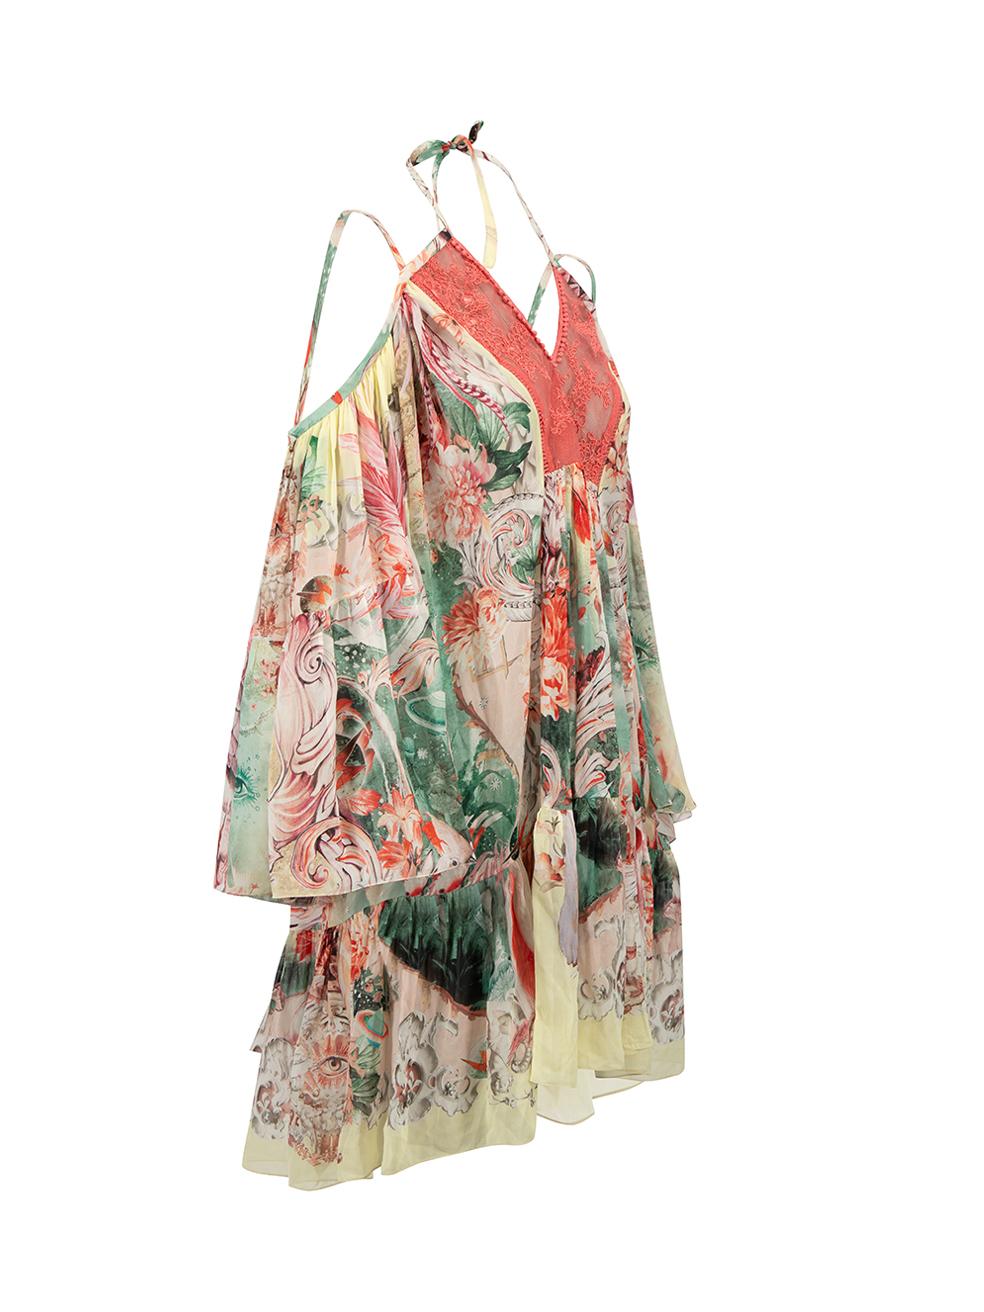 CONDITION is Very good. Hardly any visible wear to dress is evident on this used Roberto Cavalli designer resale item.



Details


Multicolour

Silk

Dress

Floral pattern

Cold shoulder

Long sleeves

Mini

Sheer

Front pink lace